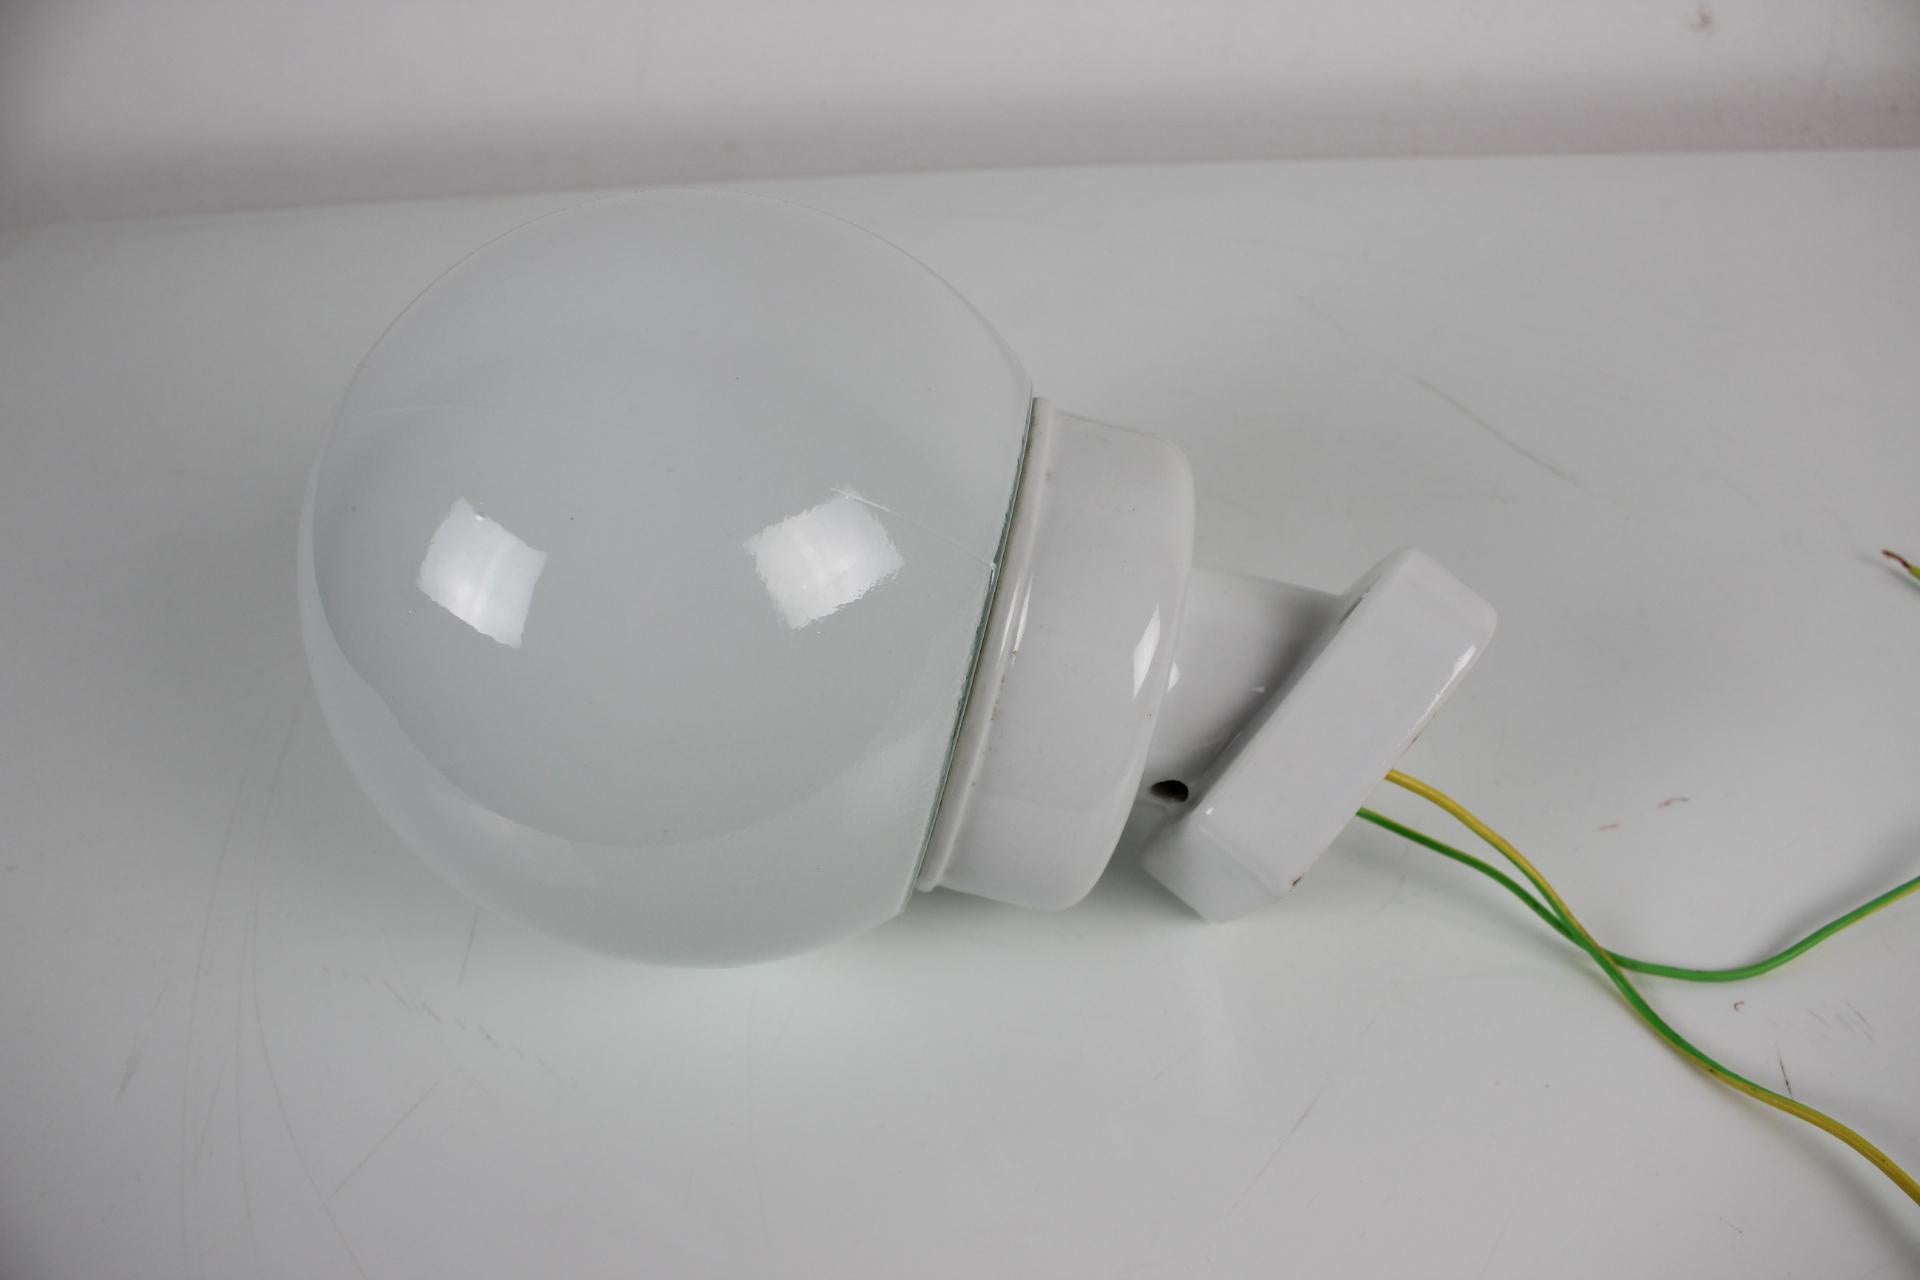 Made in Czechoslovakia.
Made of porcelain, opaline glass.
New Cabling
1xE27 or E26 bulb.
Re-polished.
Good original condition.